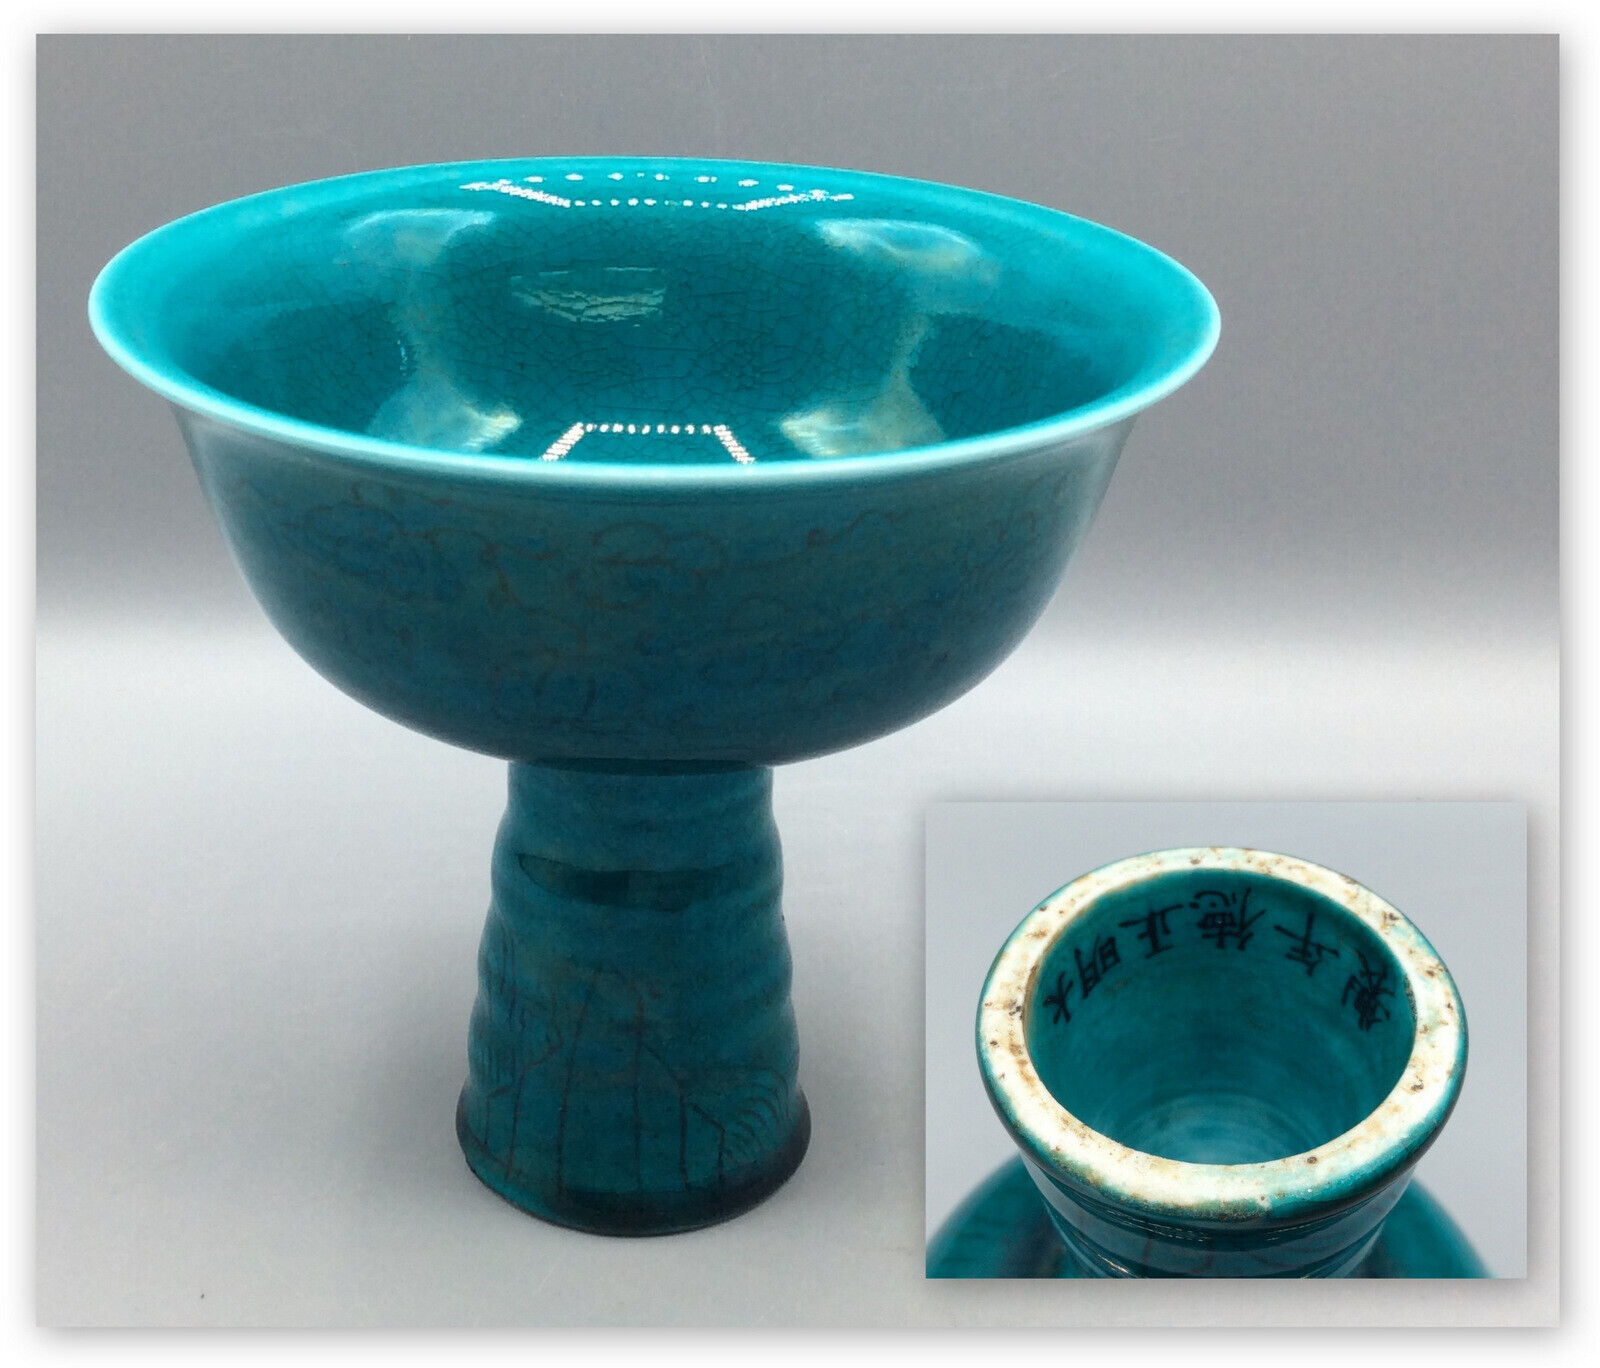 Antique Valuations: Antique Chinese Turquoise Stem Cup Zhengde Ming six charactor mark